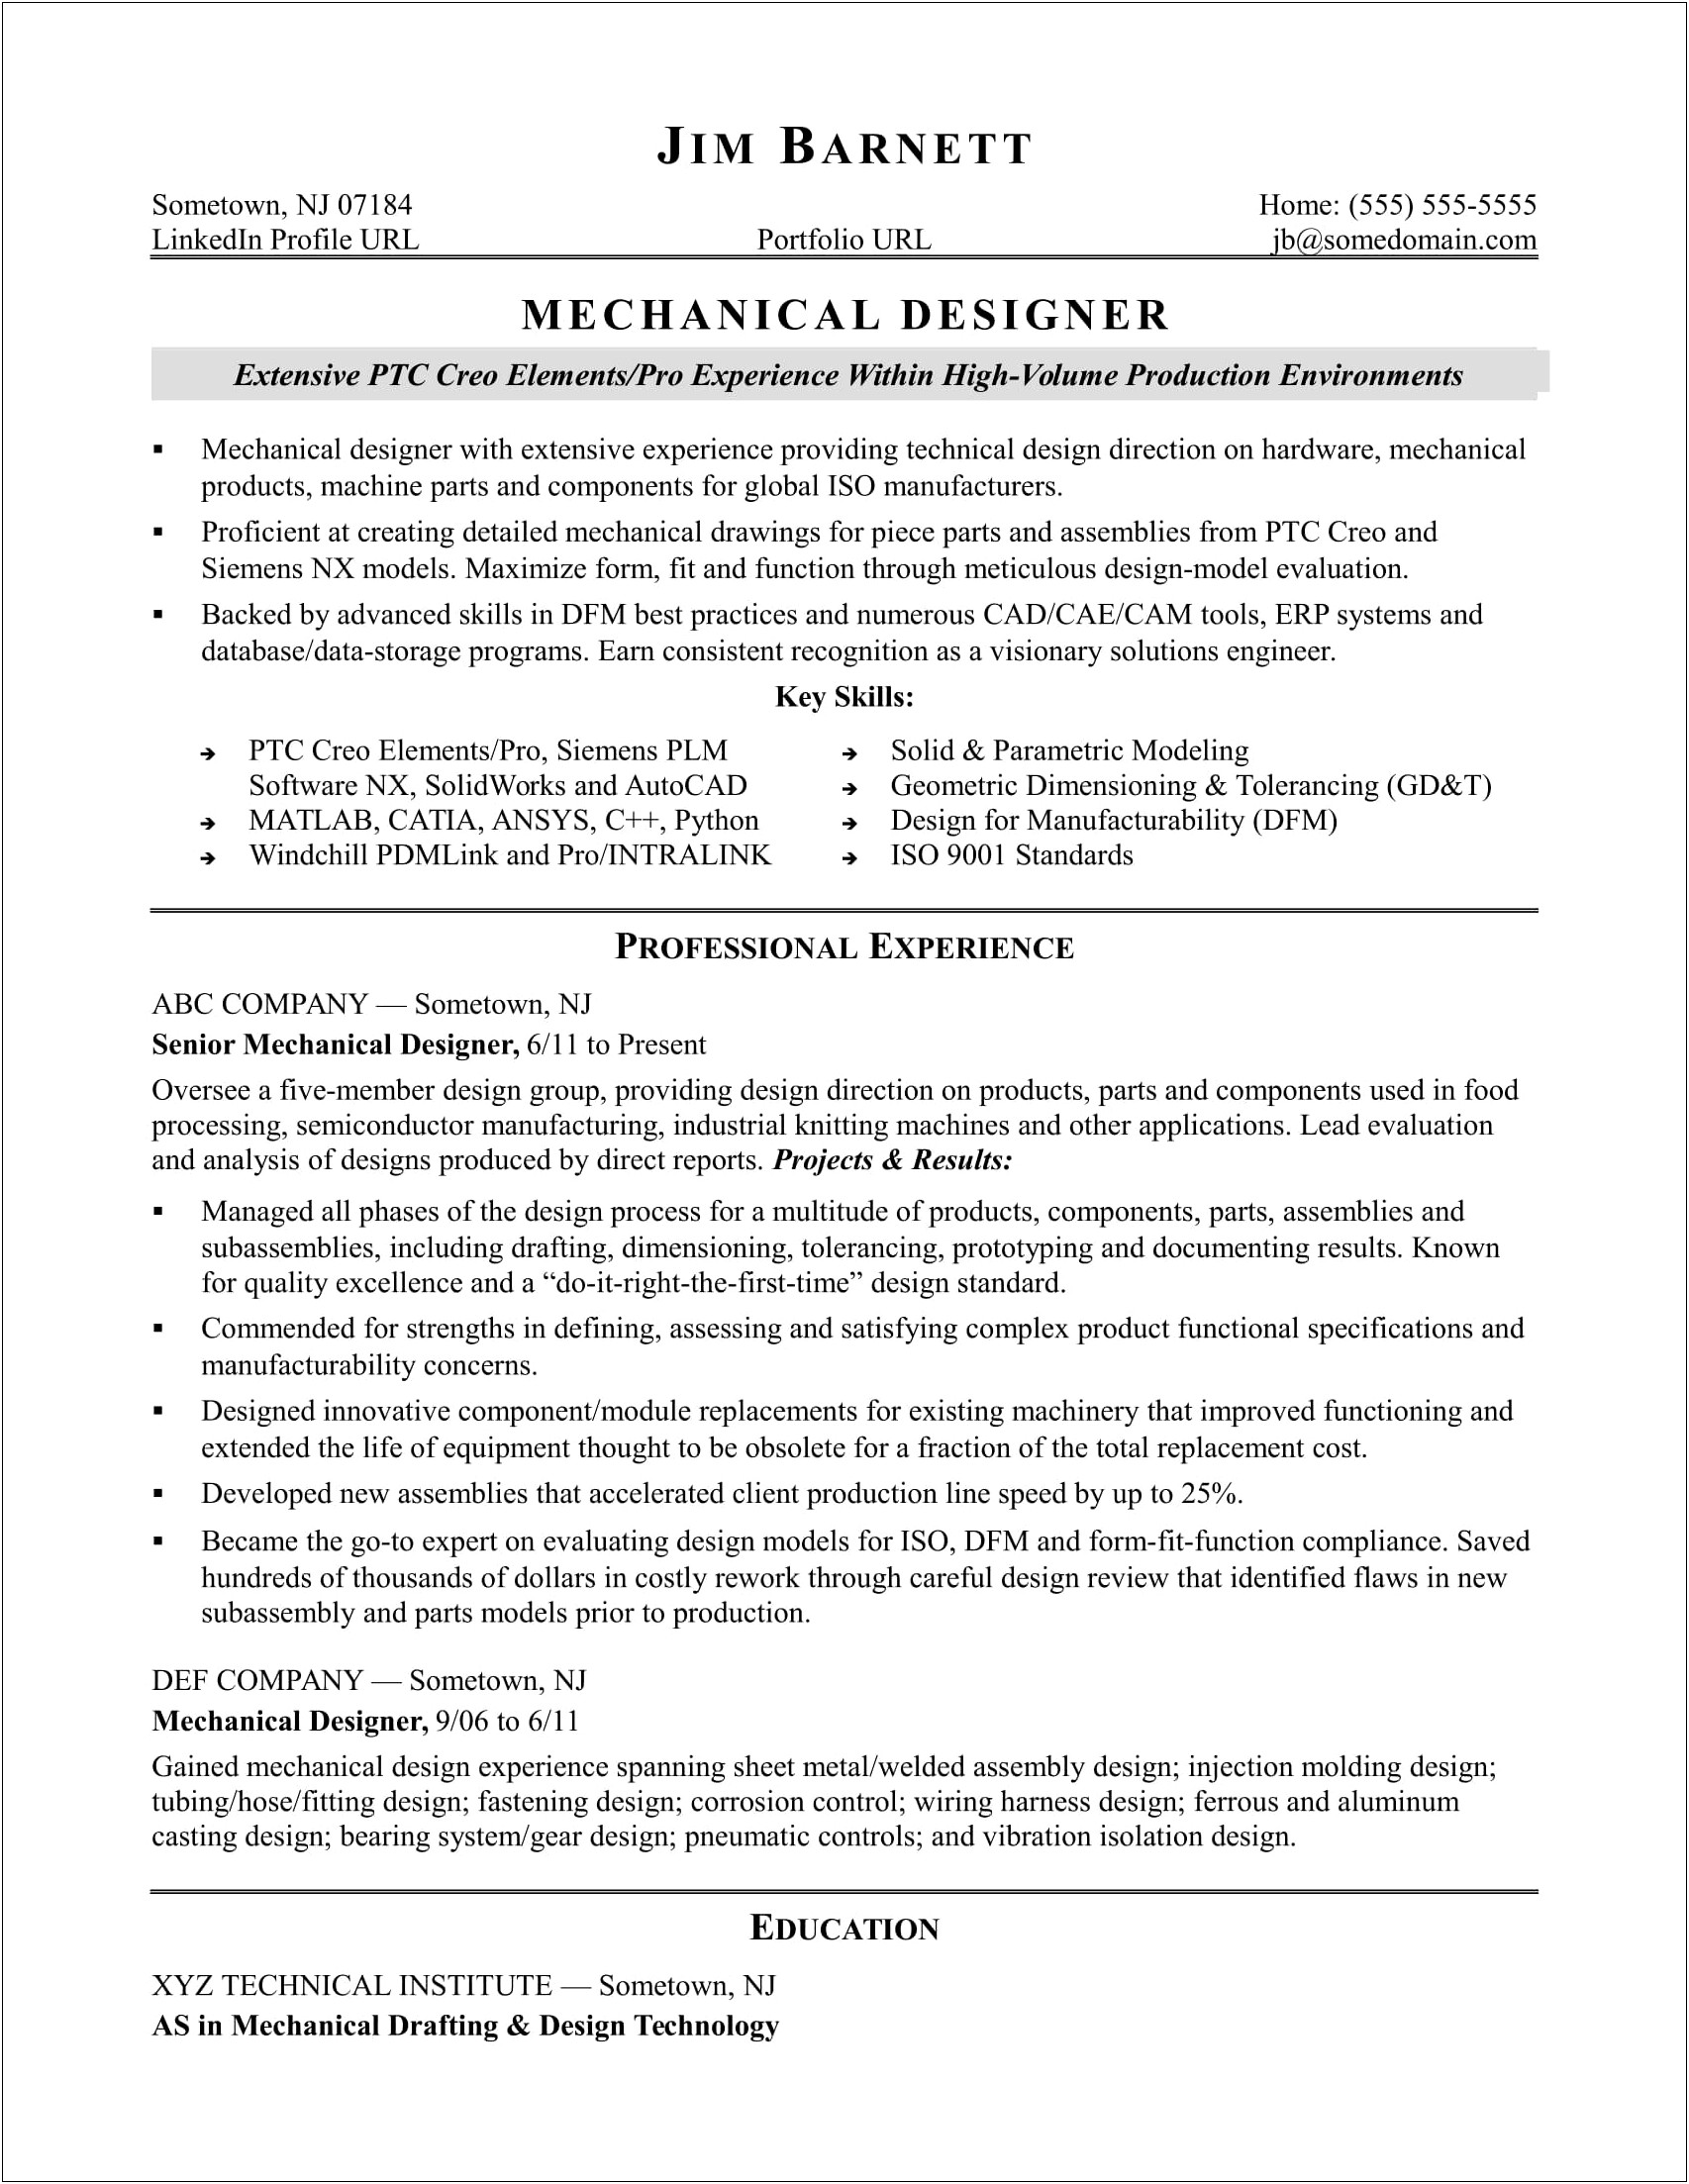 Mechanical Product Development Manager Resume